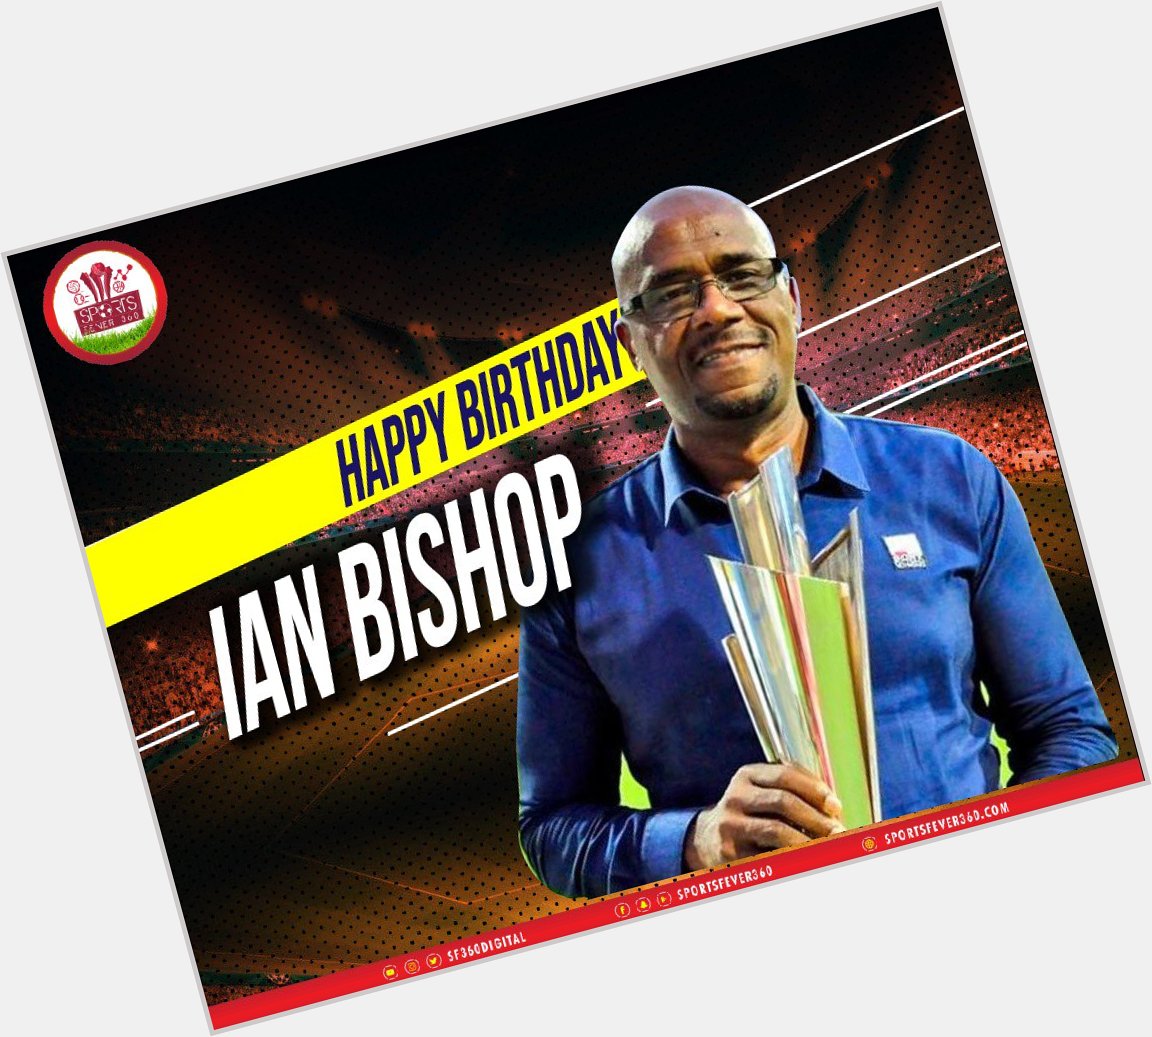 Happy birthday to the ace cricketer & commentator, Ian Bishop   